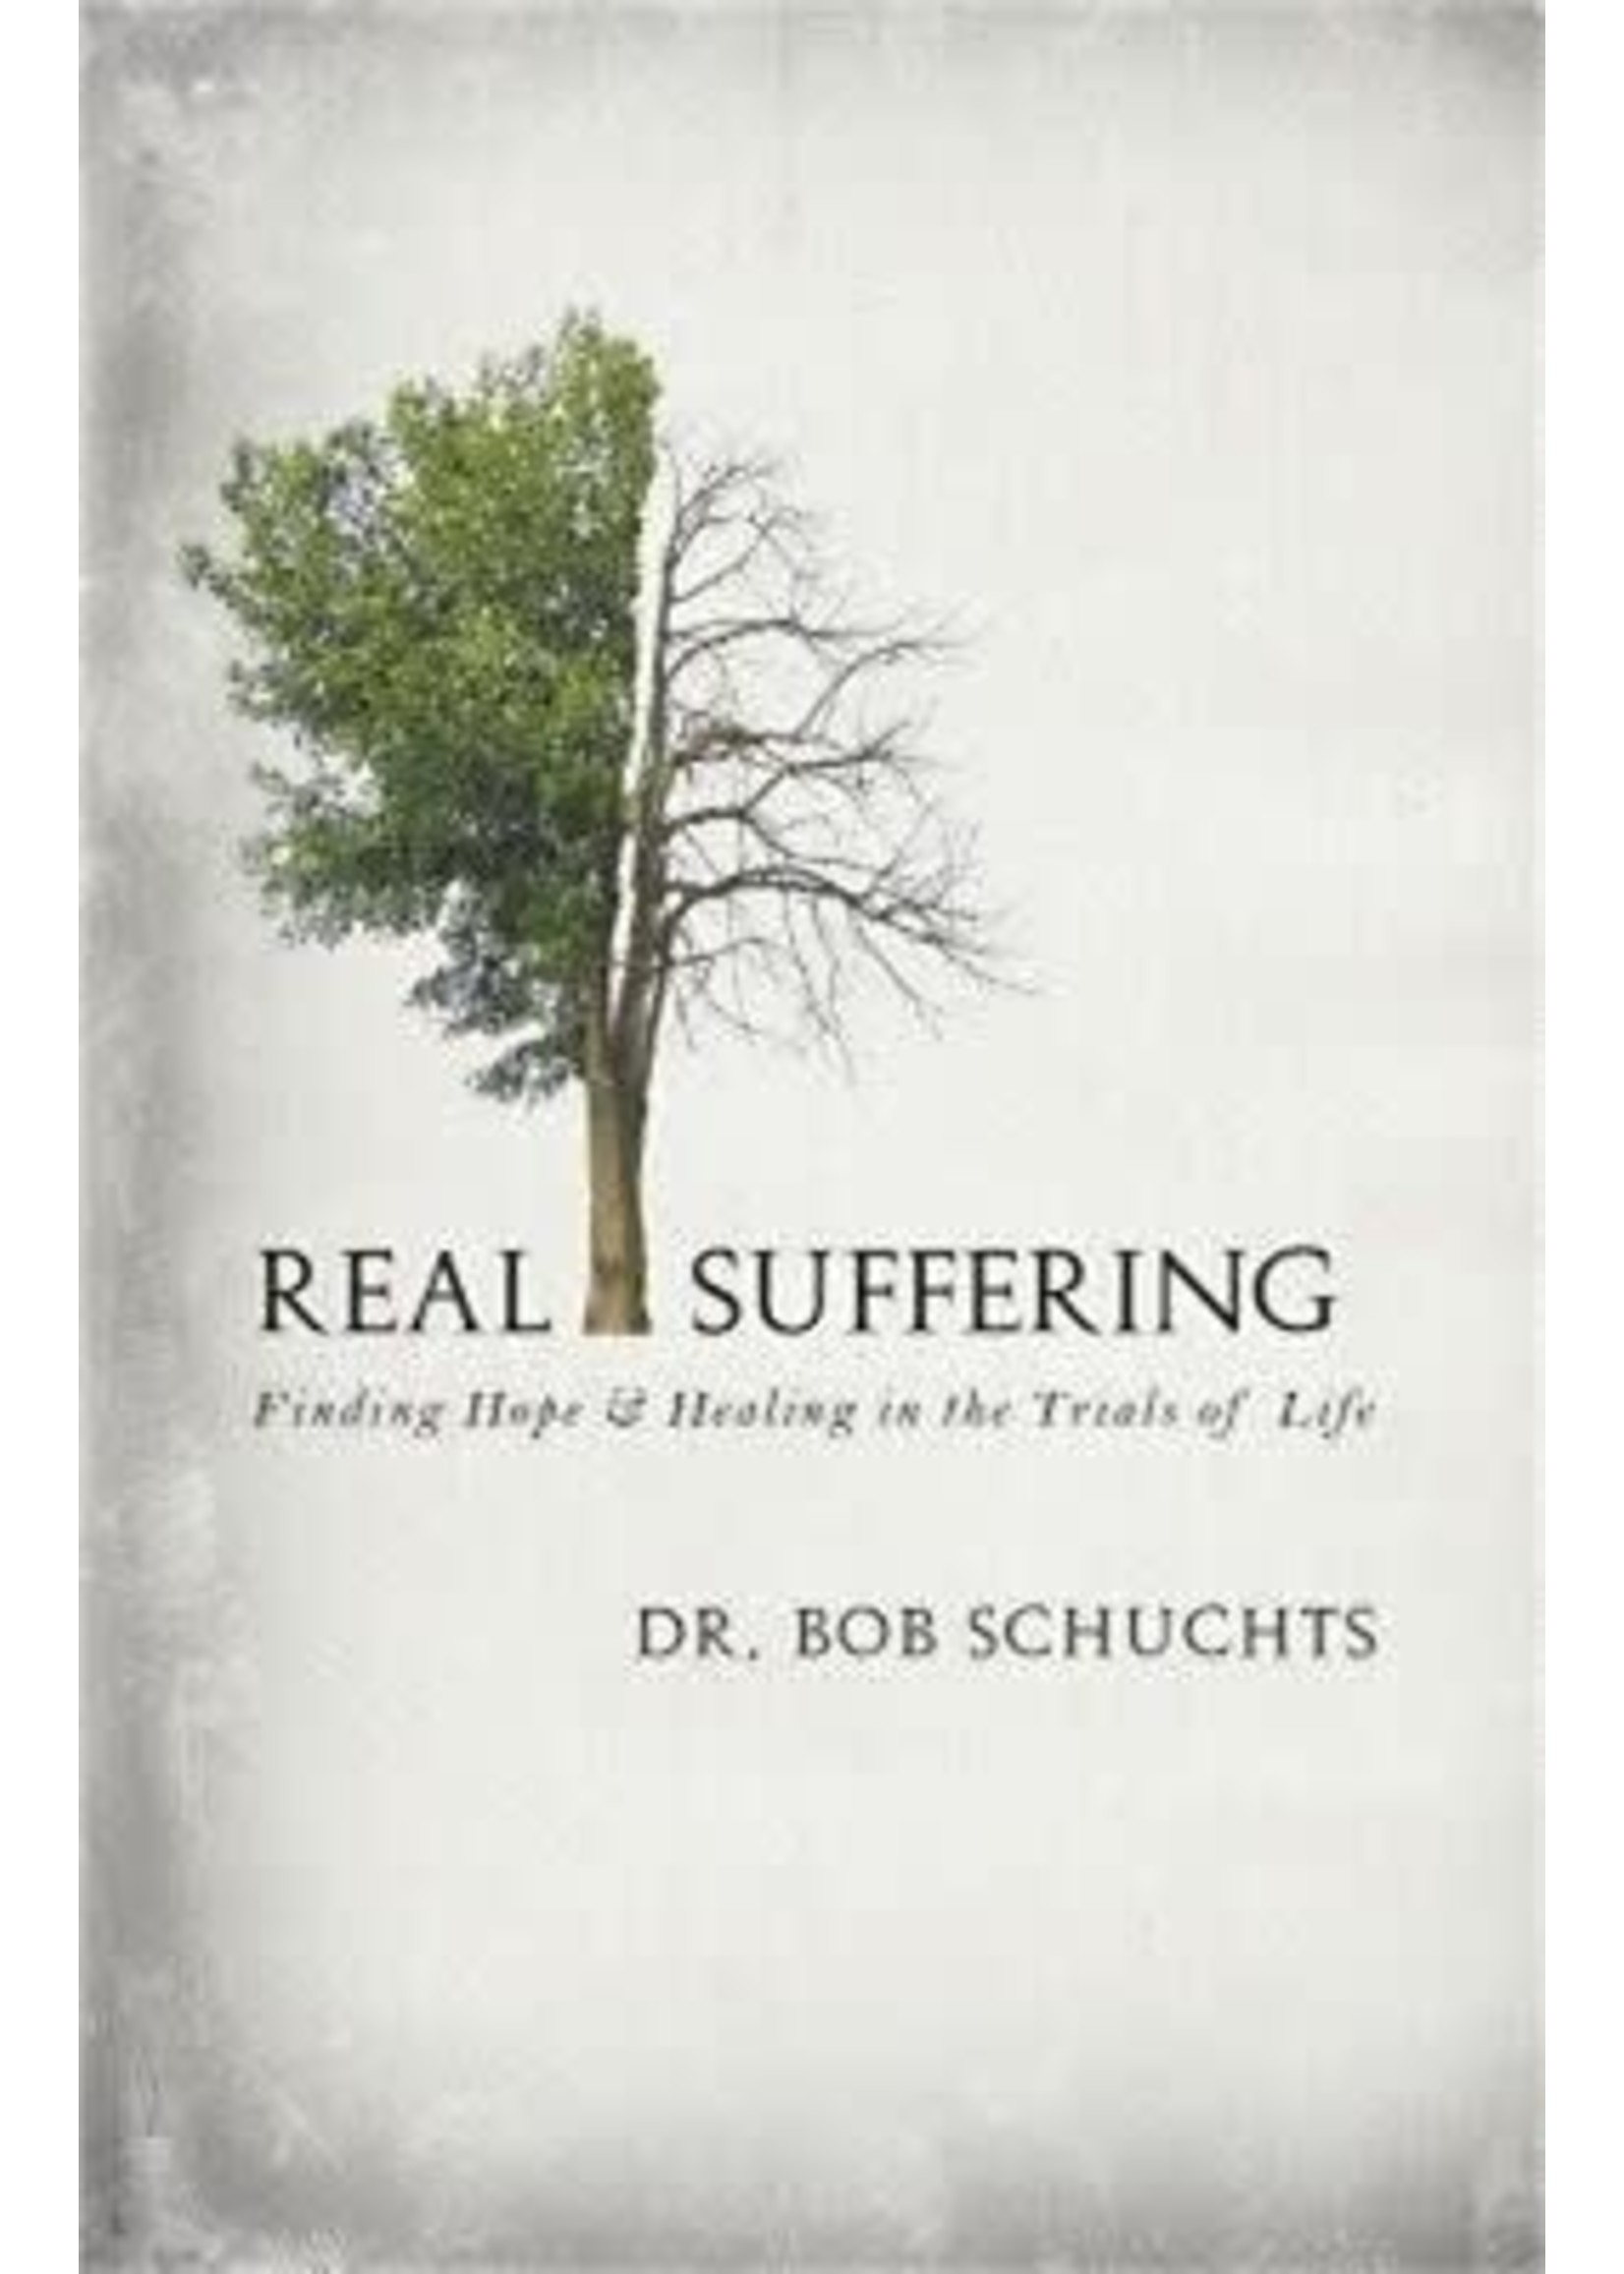 Real Suffering: Finding Hope & Healing in the Trials of Life